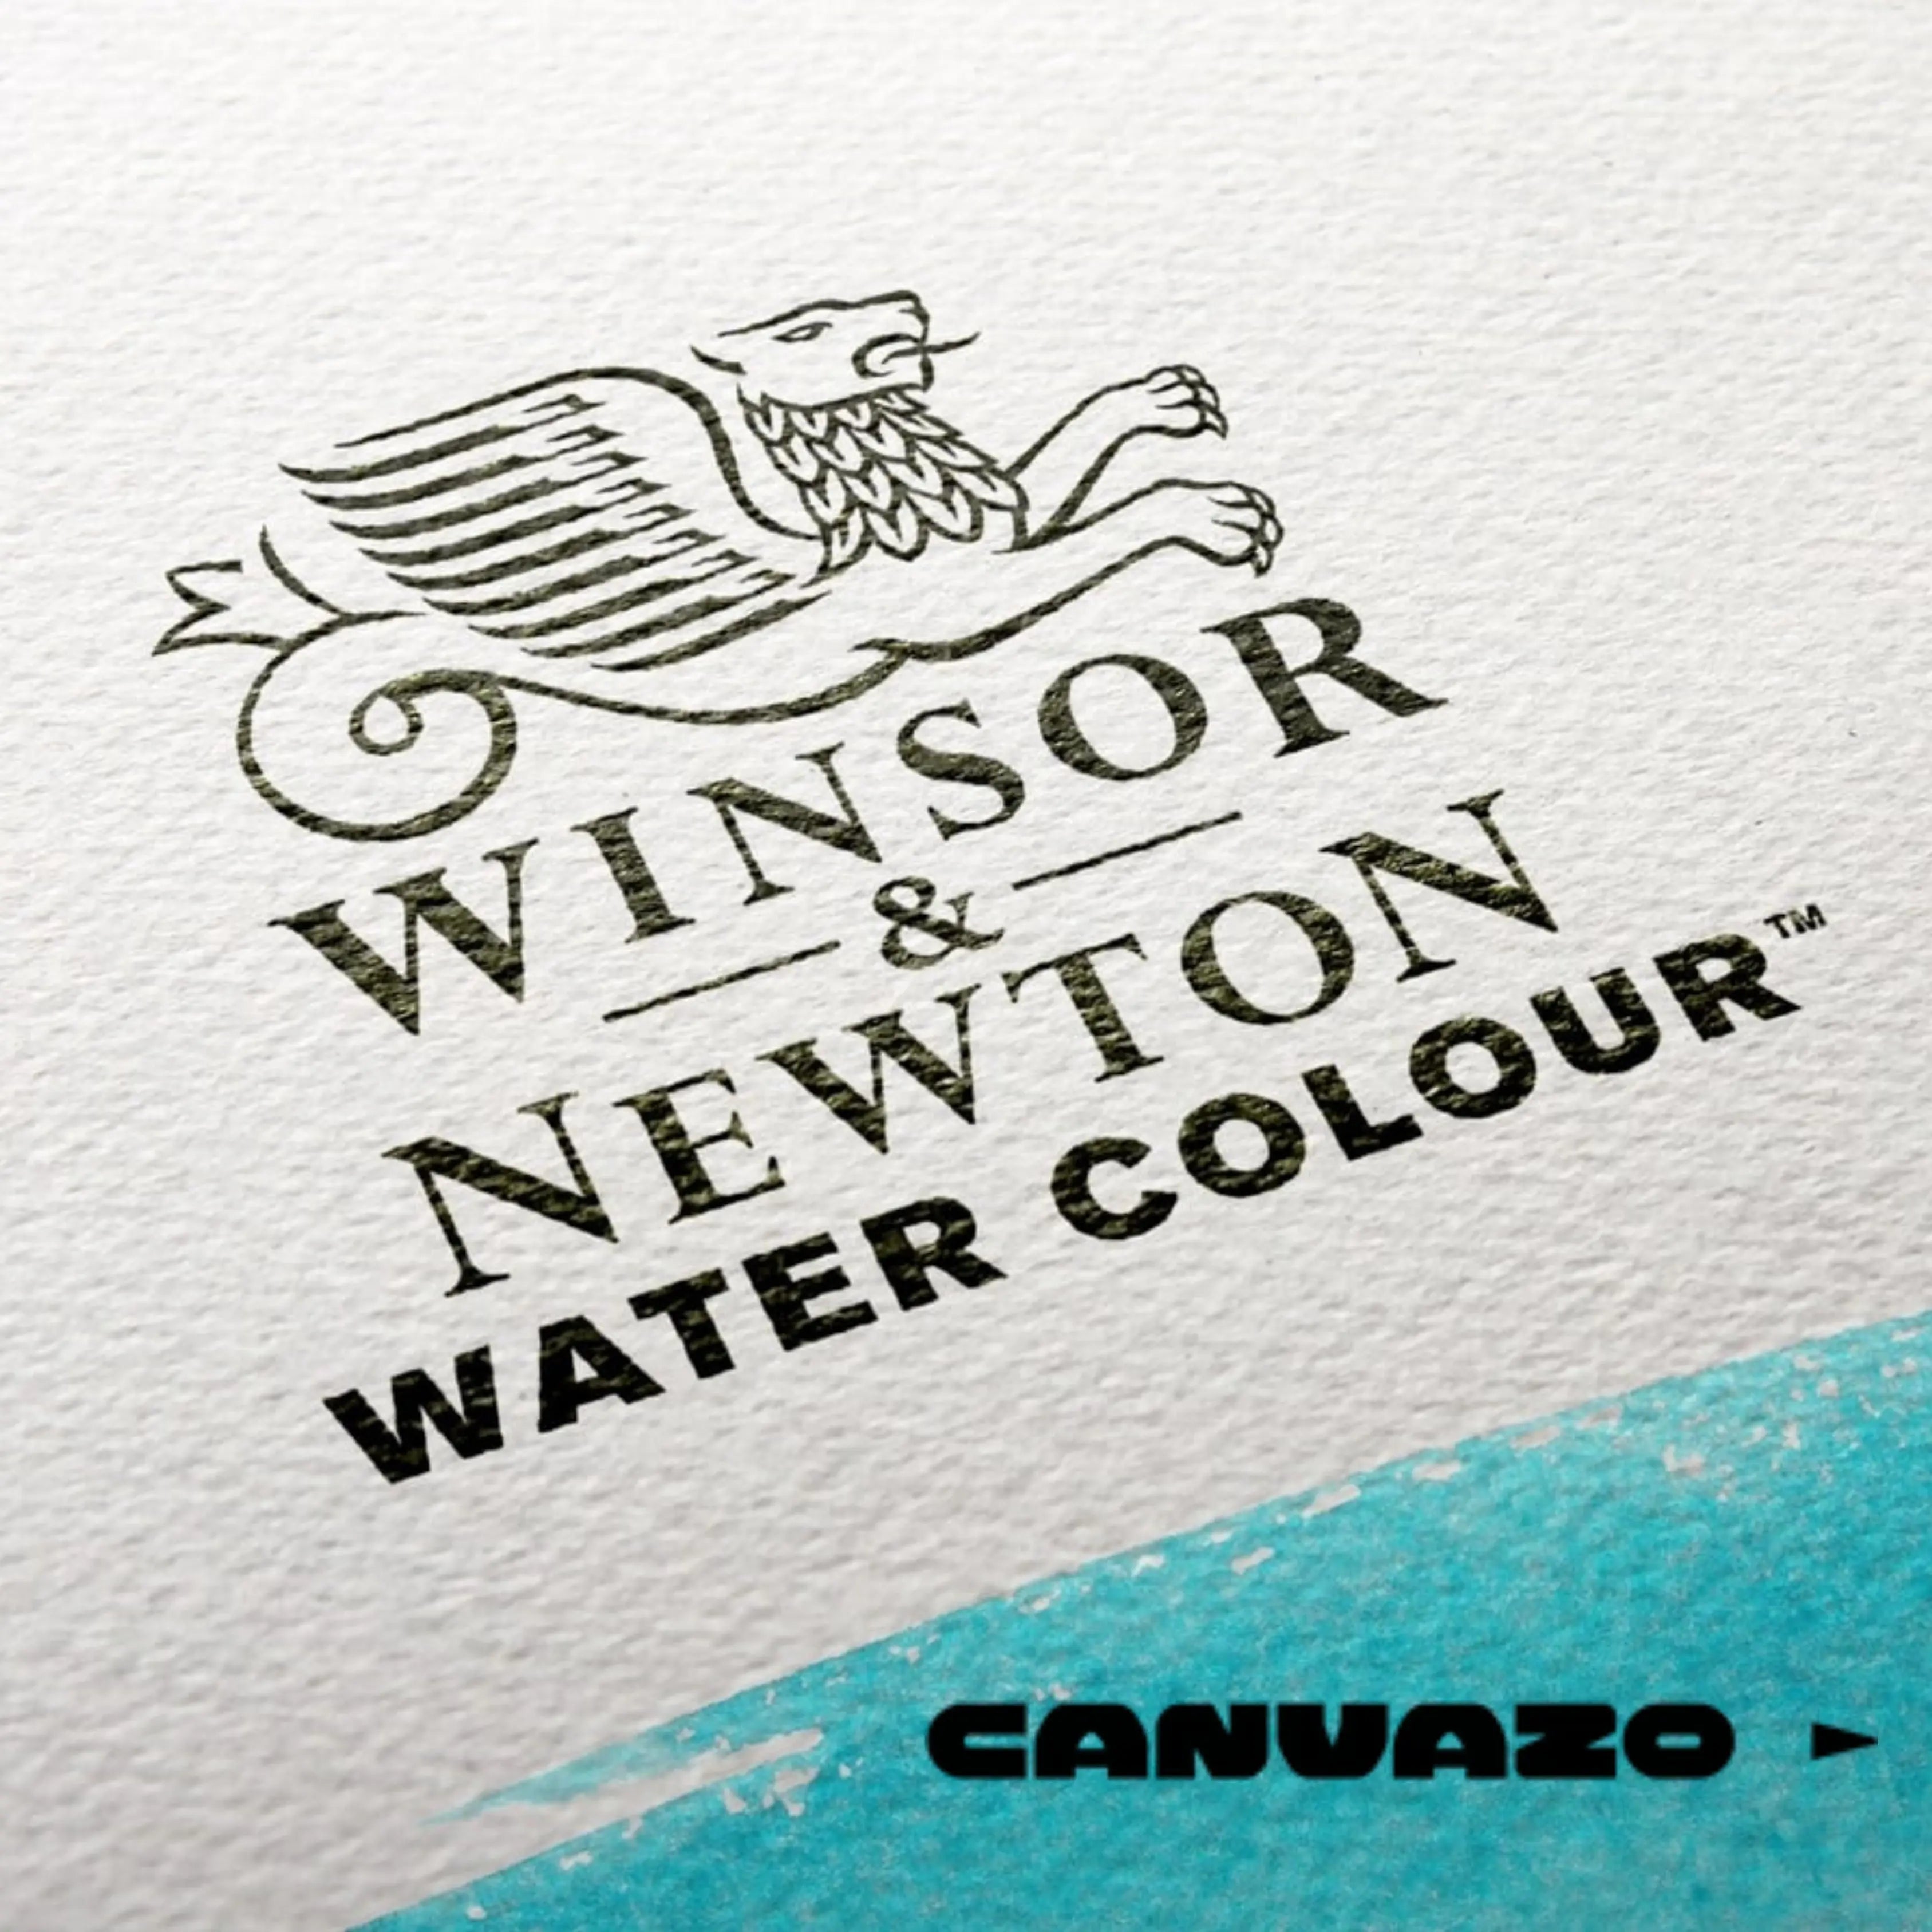 Winsor and Newton: A History of Excellence in Art Supplies Canvazo